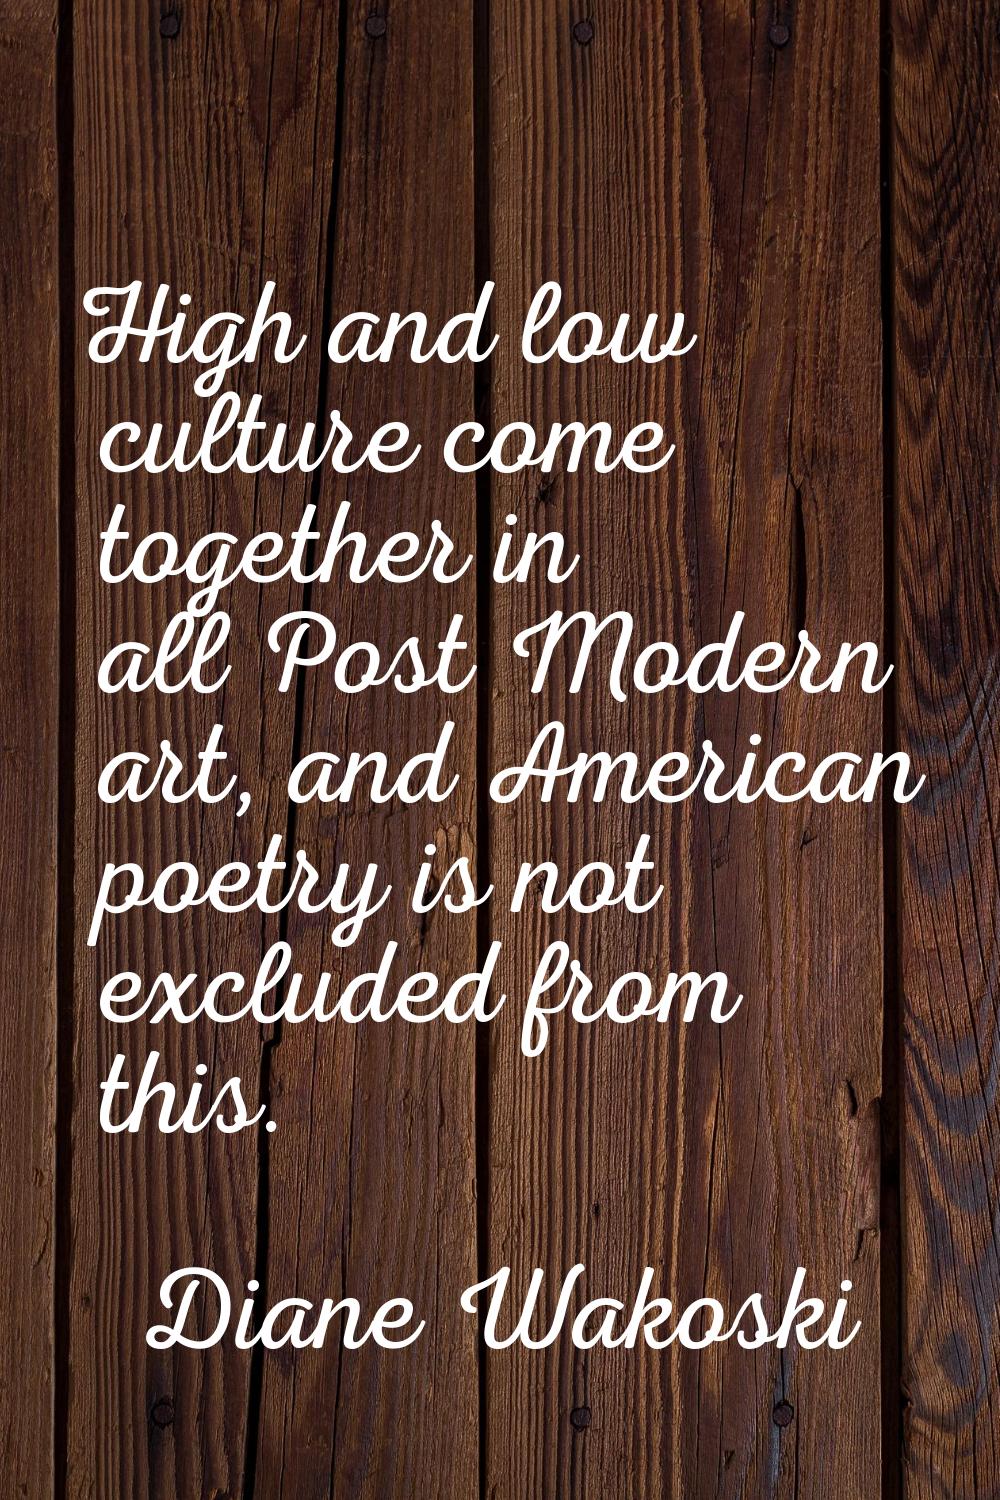 High and low culture come together in all Post Modern art, and American poetry is not excluded from